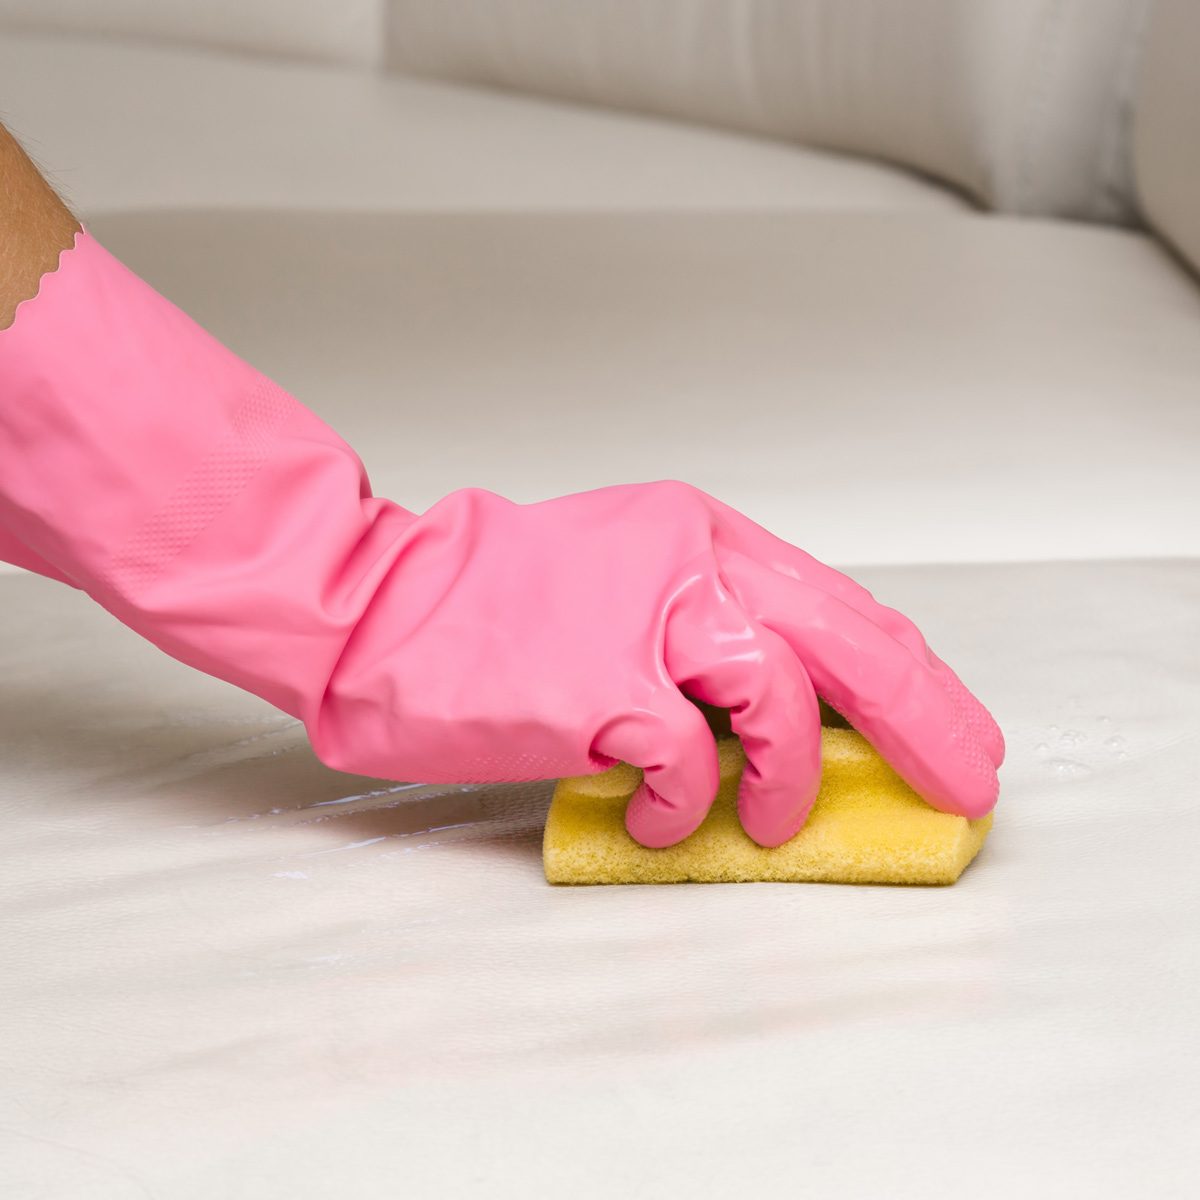 Cleaning-leather-sofa-with-sponge